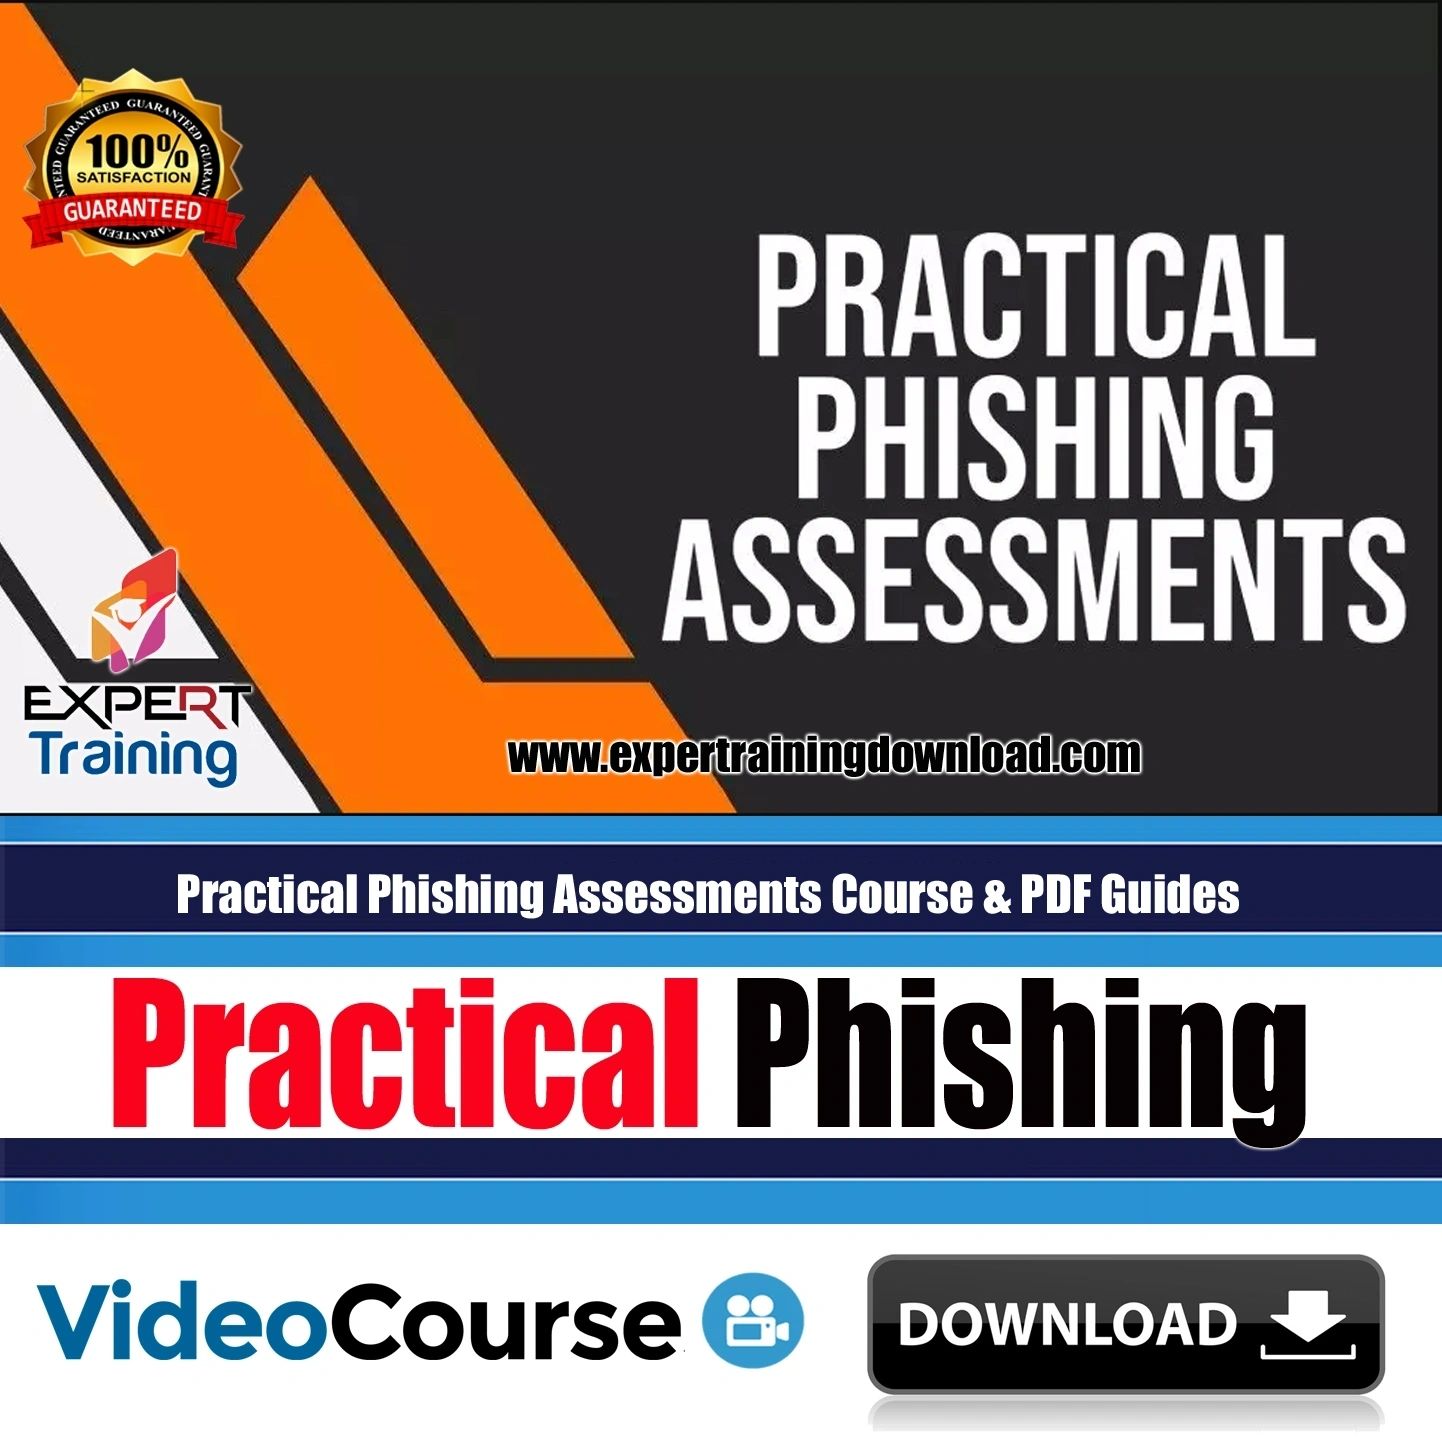 Practical Phishing Assessments Course & PDF Guides